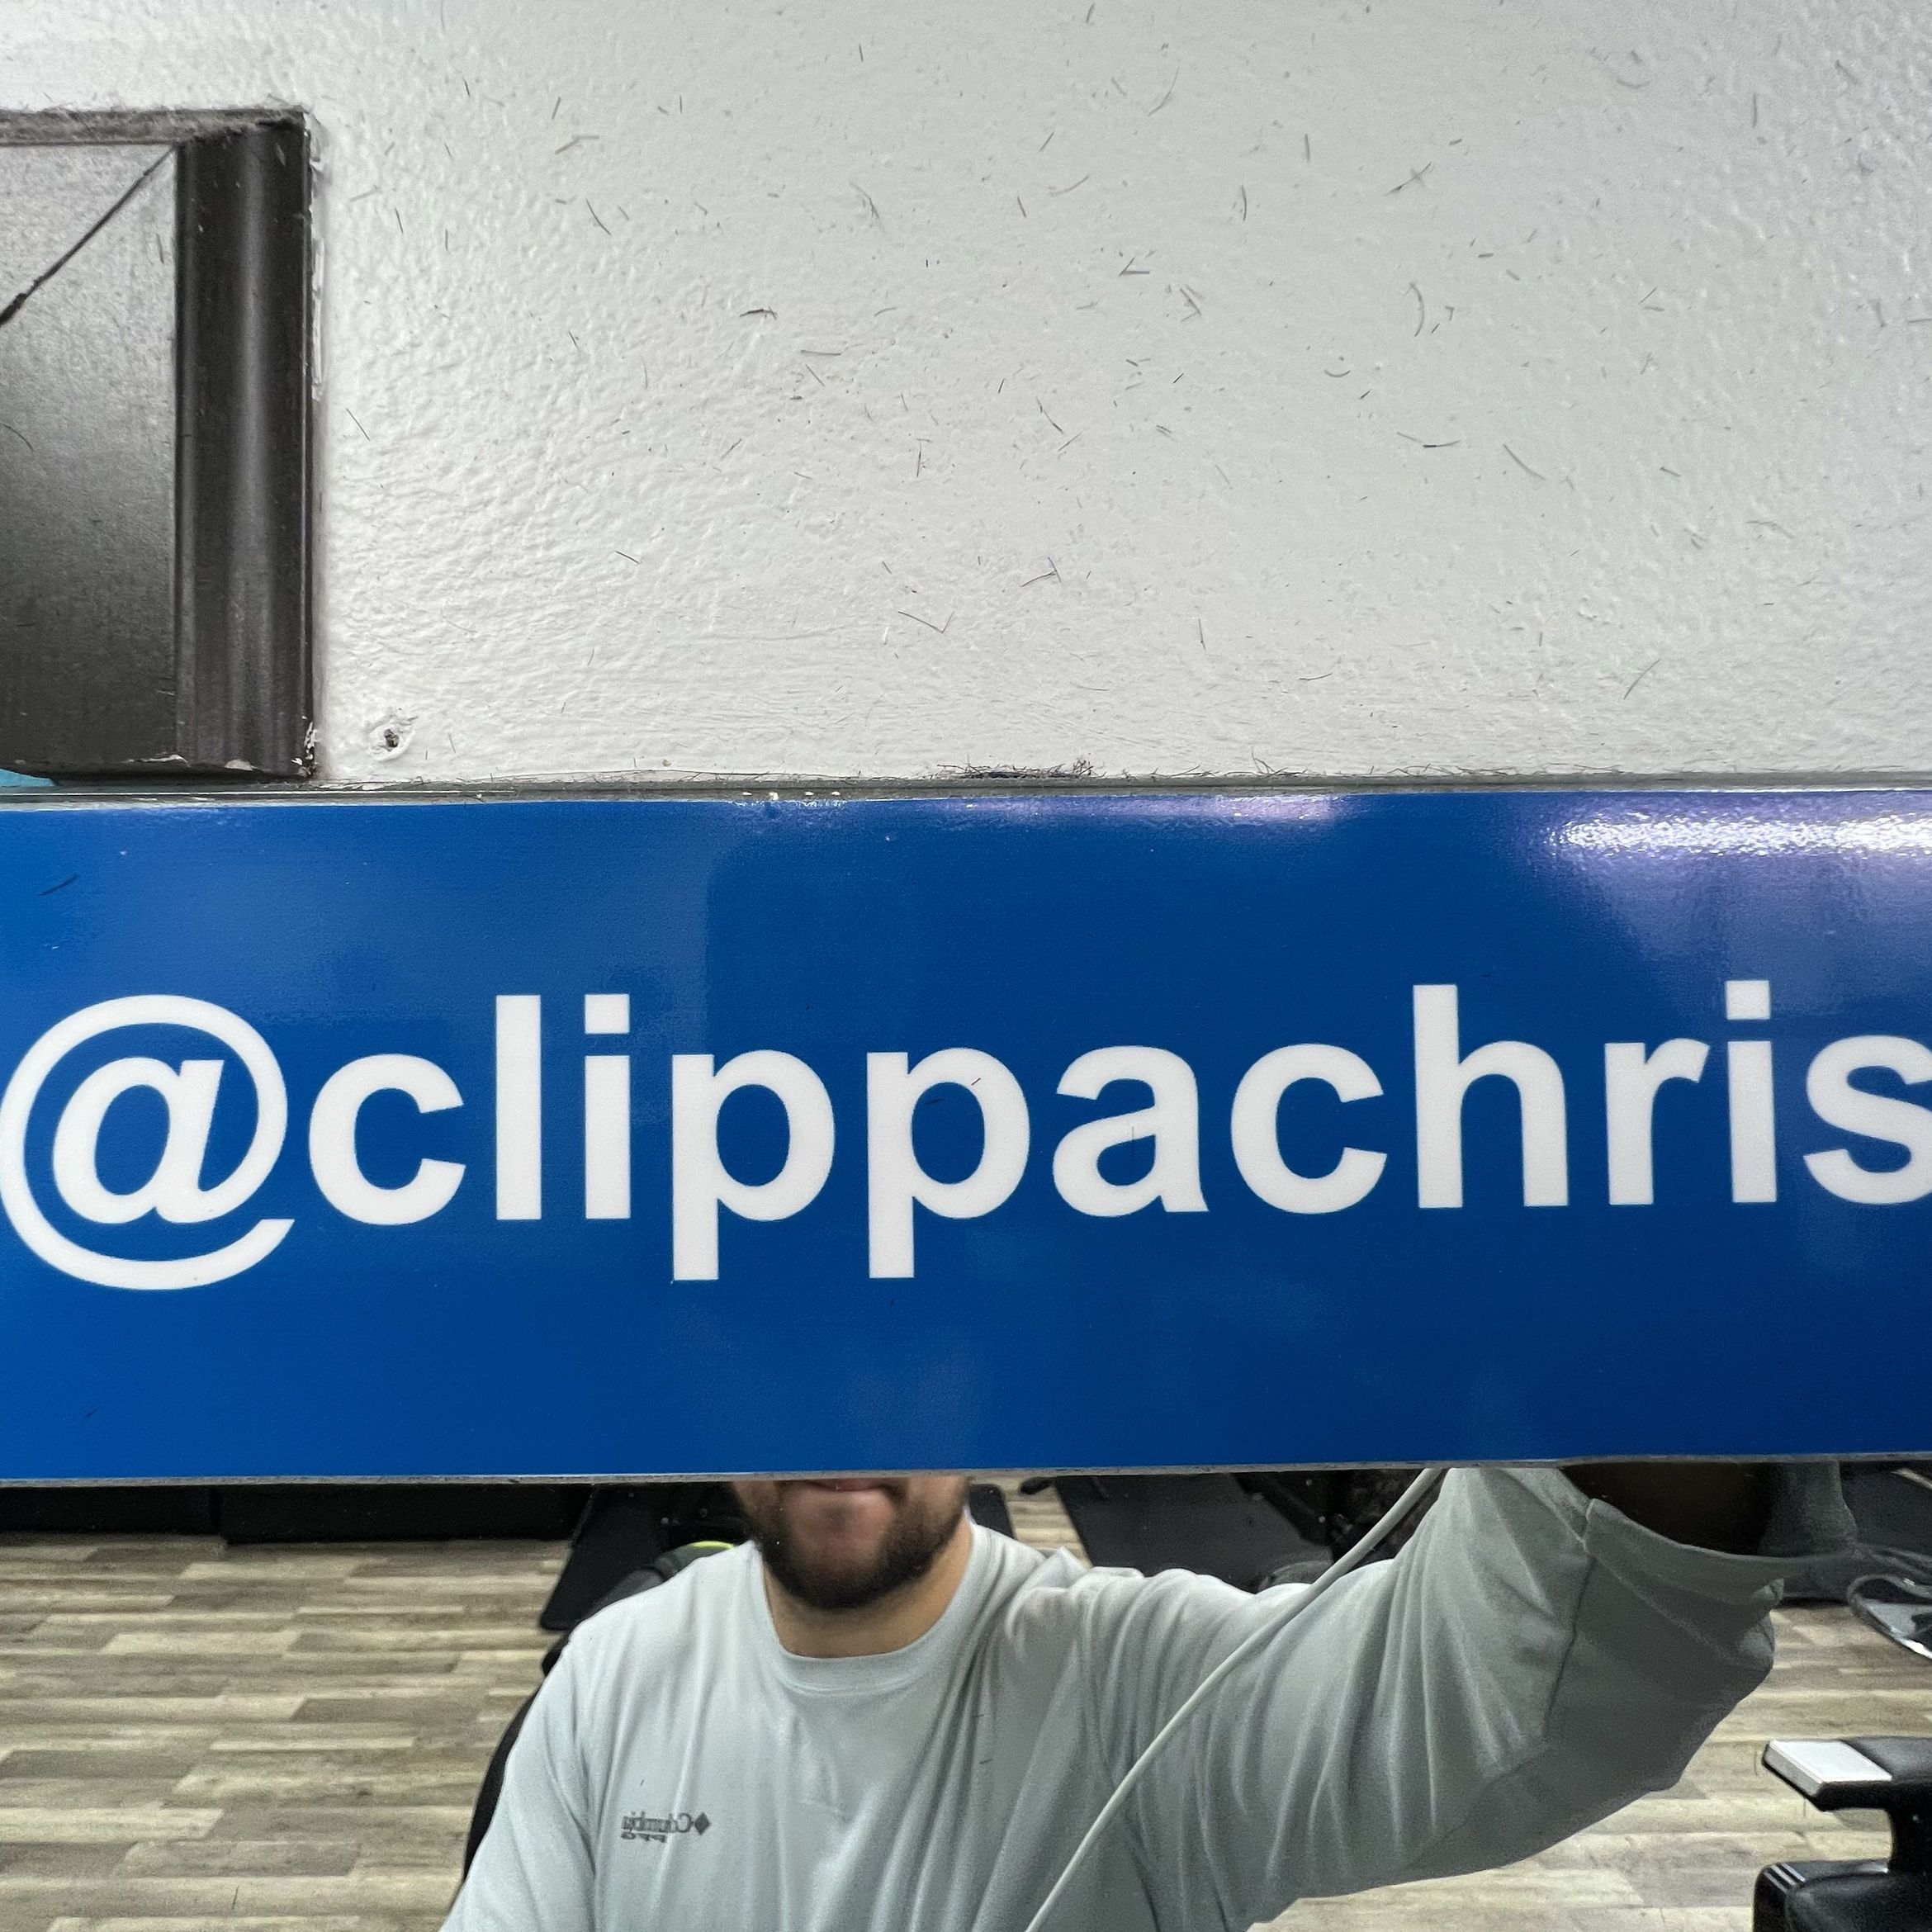 Clippachris Cuts, 10764 SW 72nd St, Miami, 33173